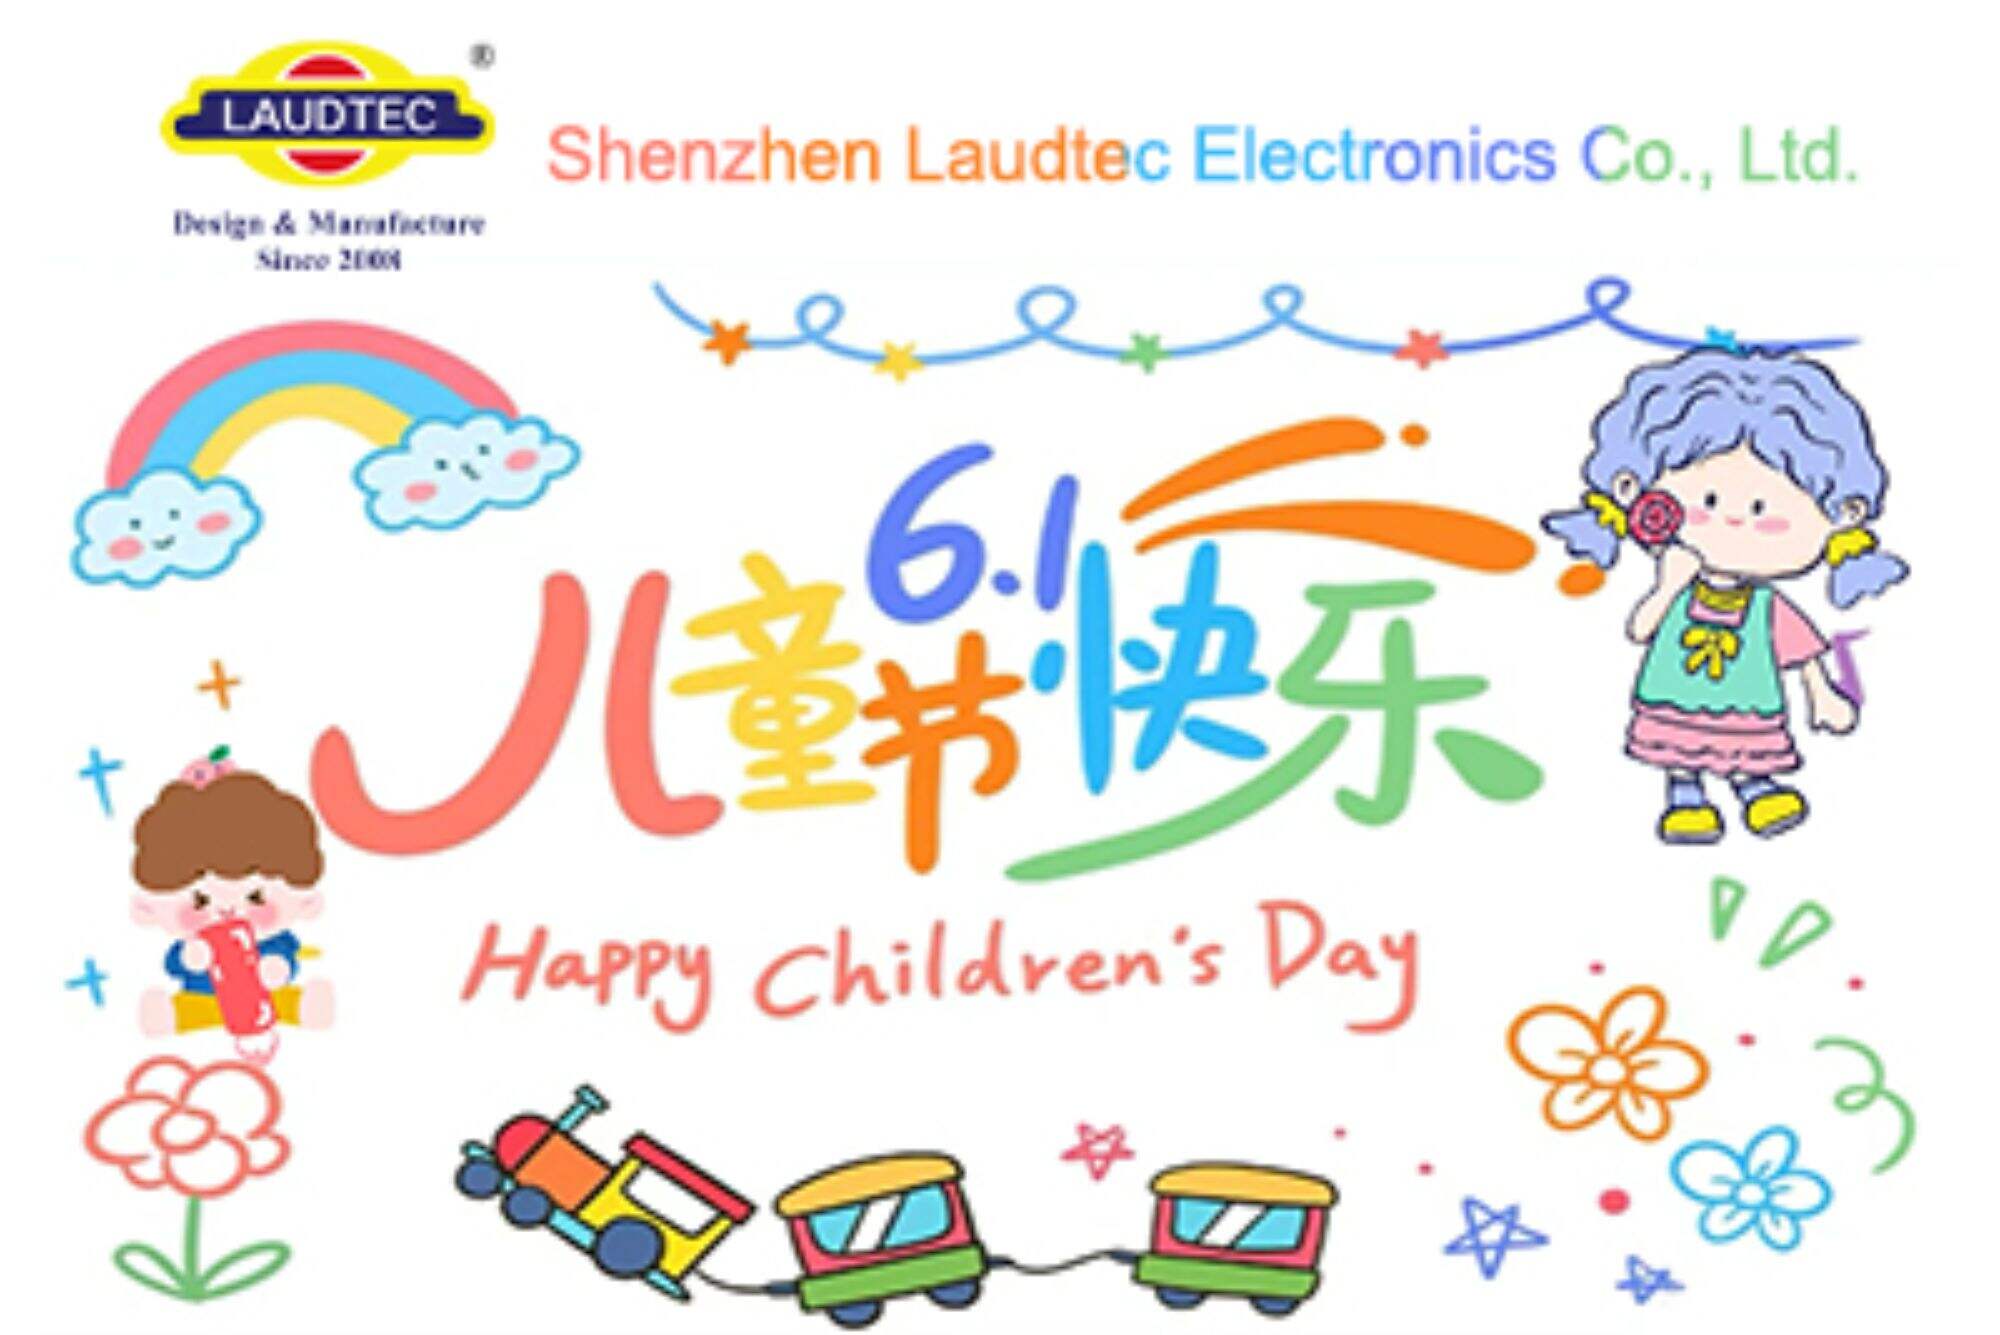 Laudtec Celebrates International Children's Day with Joy and Warmth